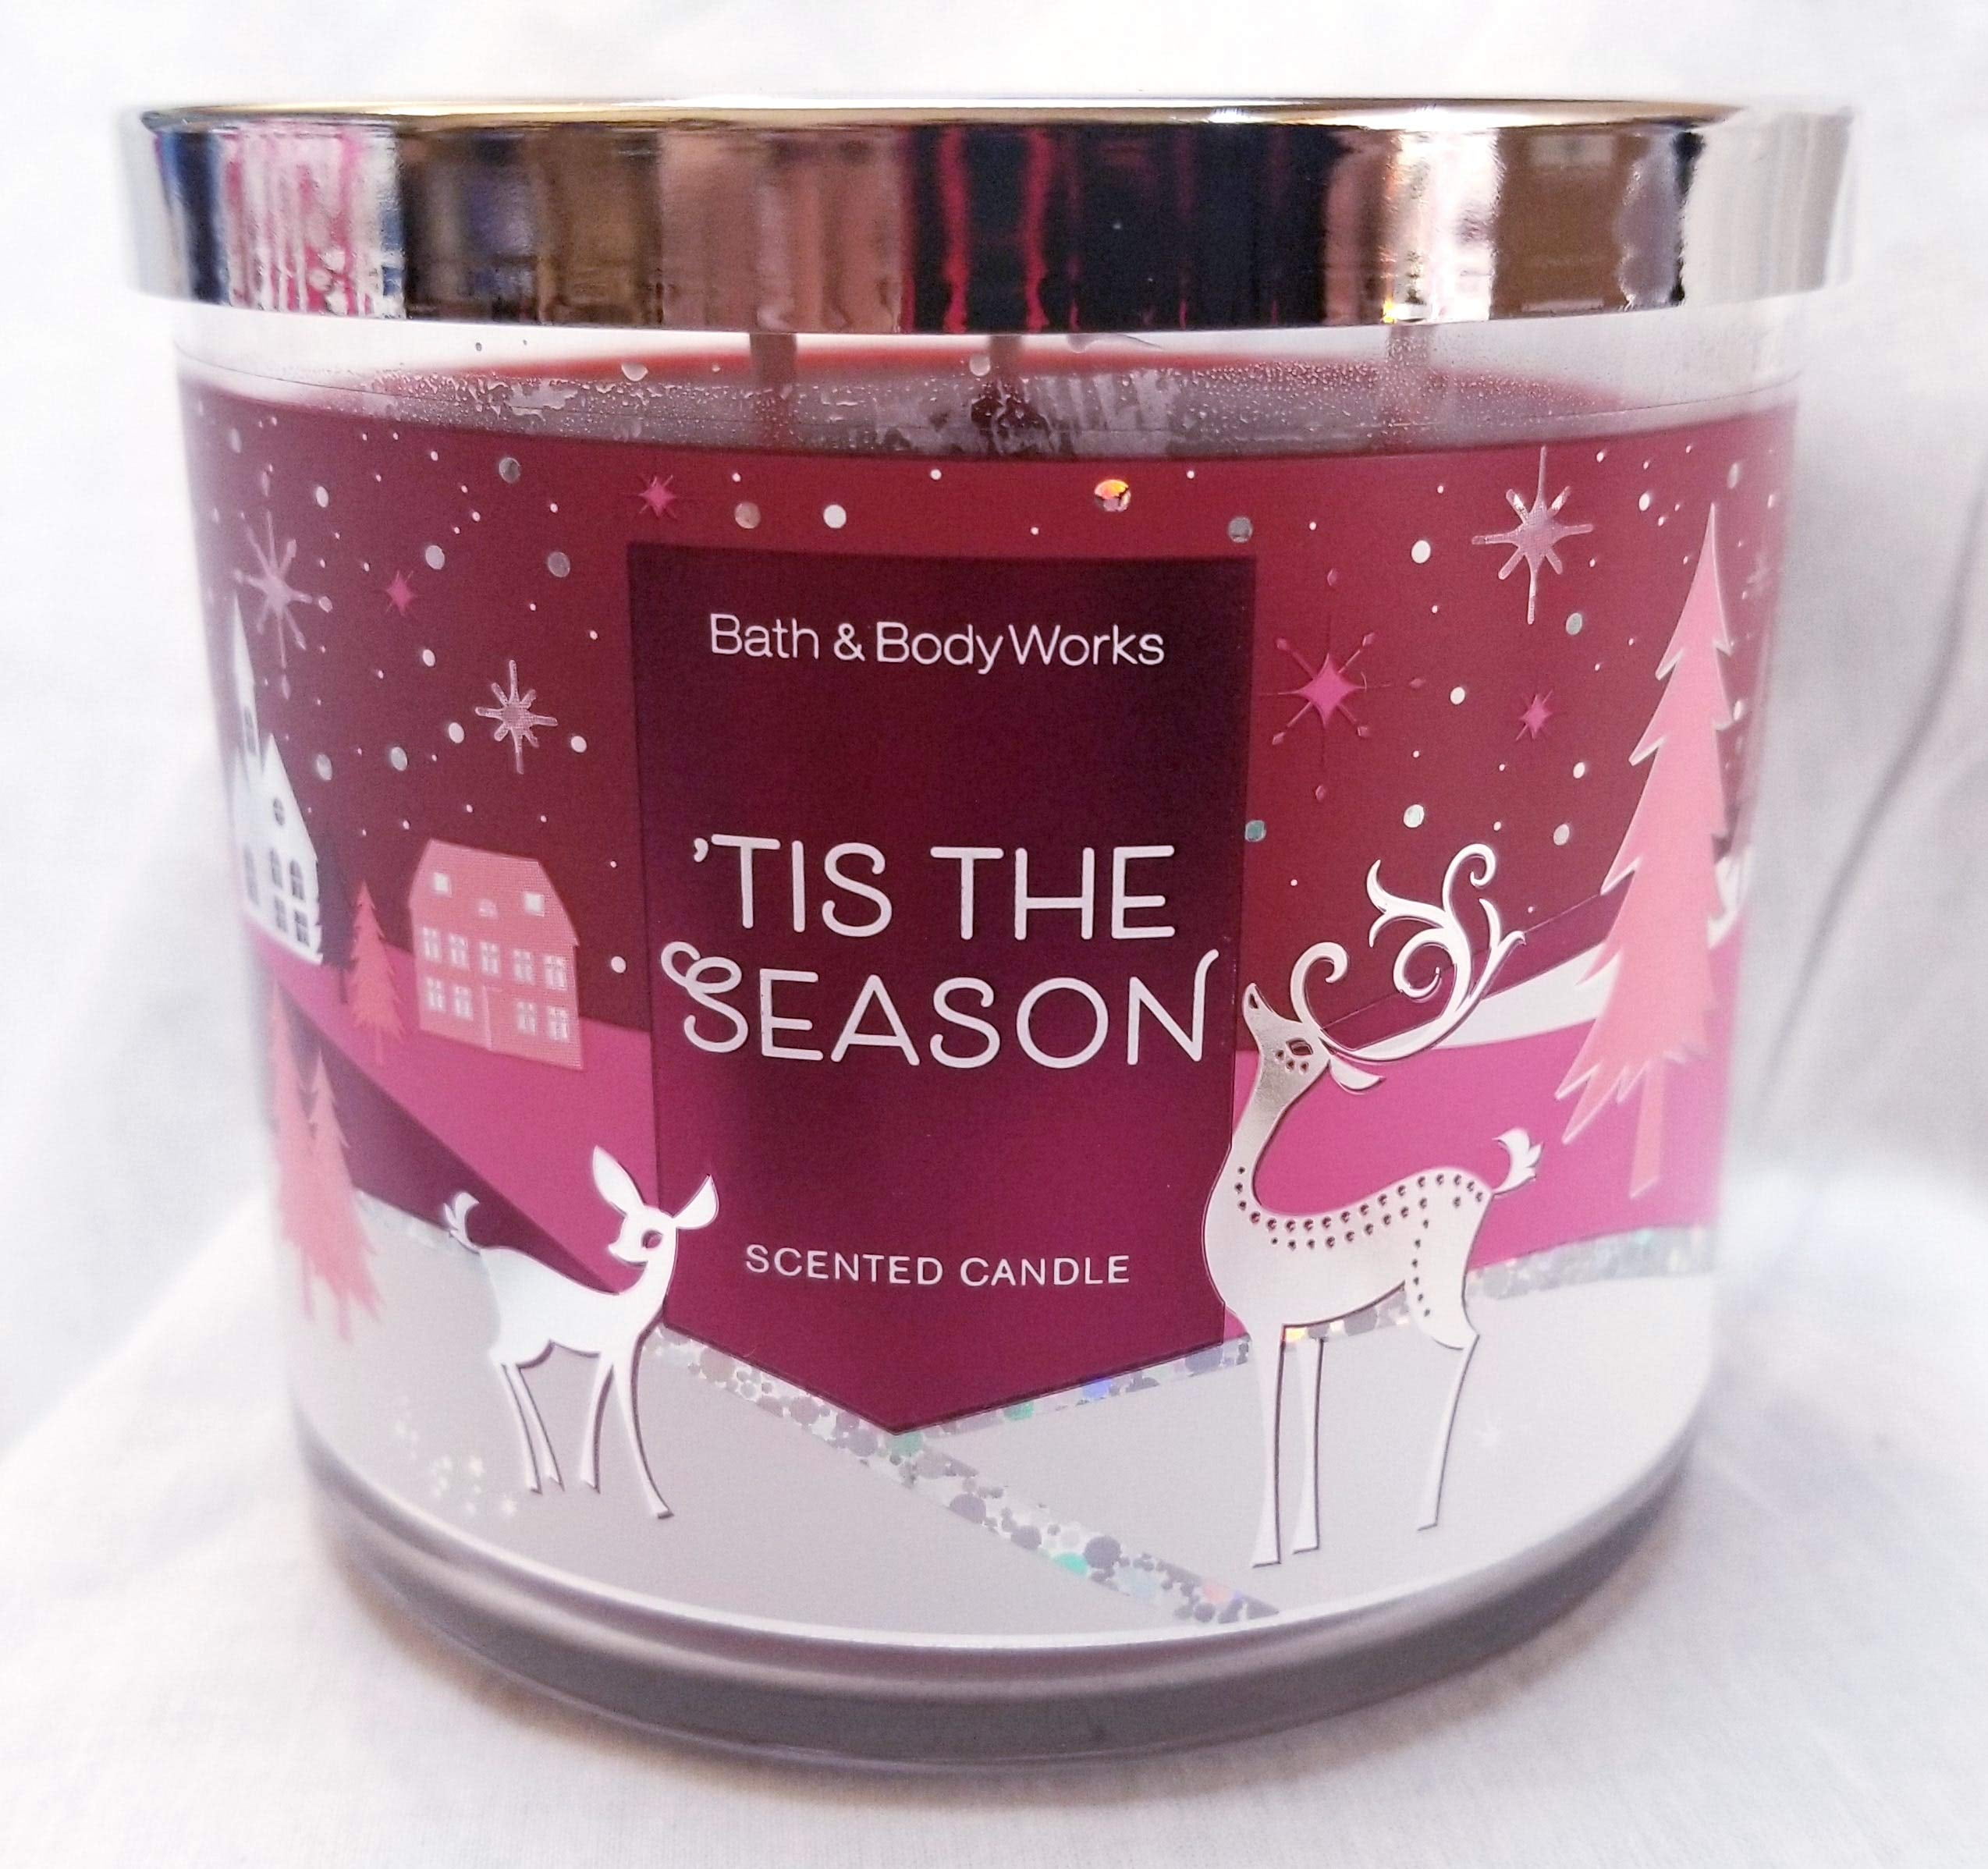 1 White Barn Bath & Body Works Honeysuckle 14.5oz 3-wick Scented Candle 